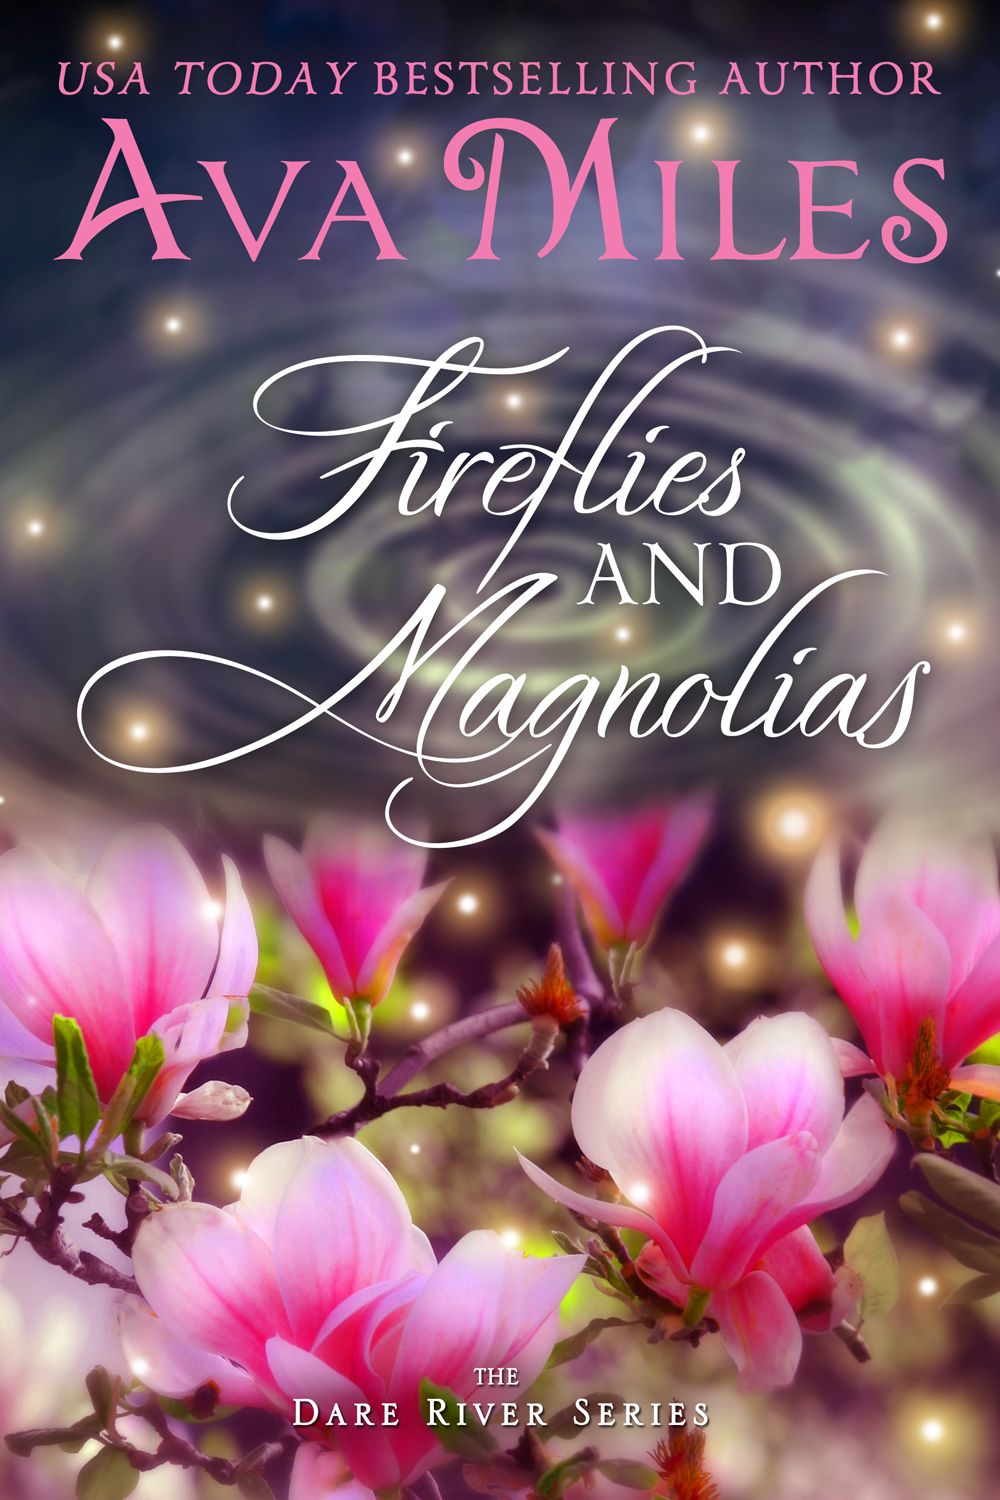 Fireflies and Magnolias (2015) by Ava Miles